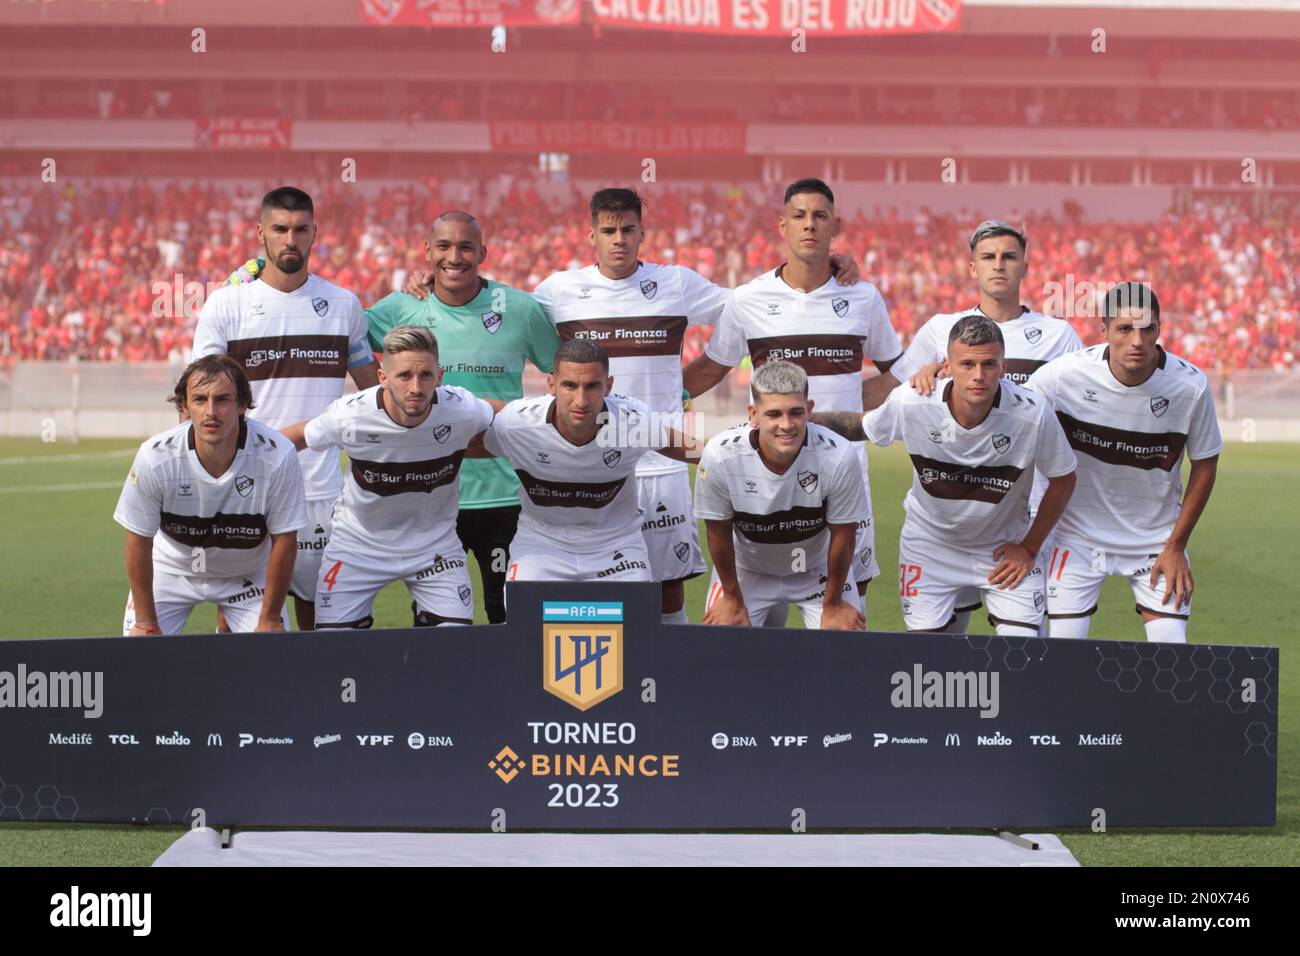 Buenos Aires, Argentina, 5th Feb 2023, Team of Platense before the match for the 2nd round of Argentina´s Liga Profesional de Fútbol Binance Cup at Libertadores Stadium (Photo: Néstor J. Beremblum) Credit: Néstor J. Beremblum/Alamy Live News Stock Photo